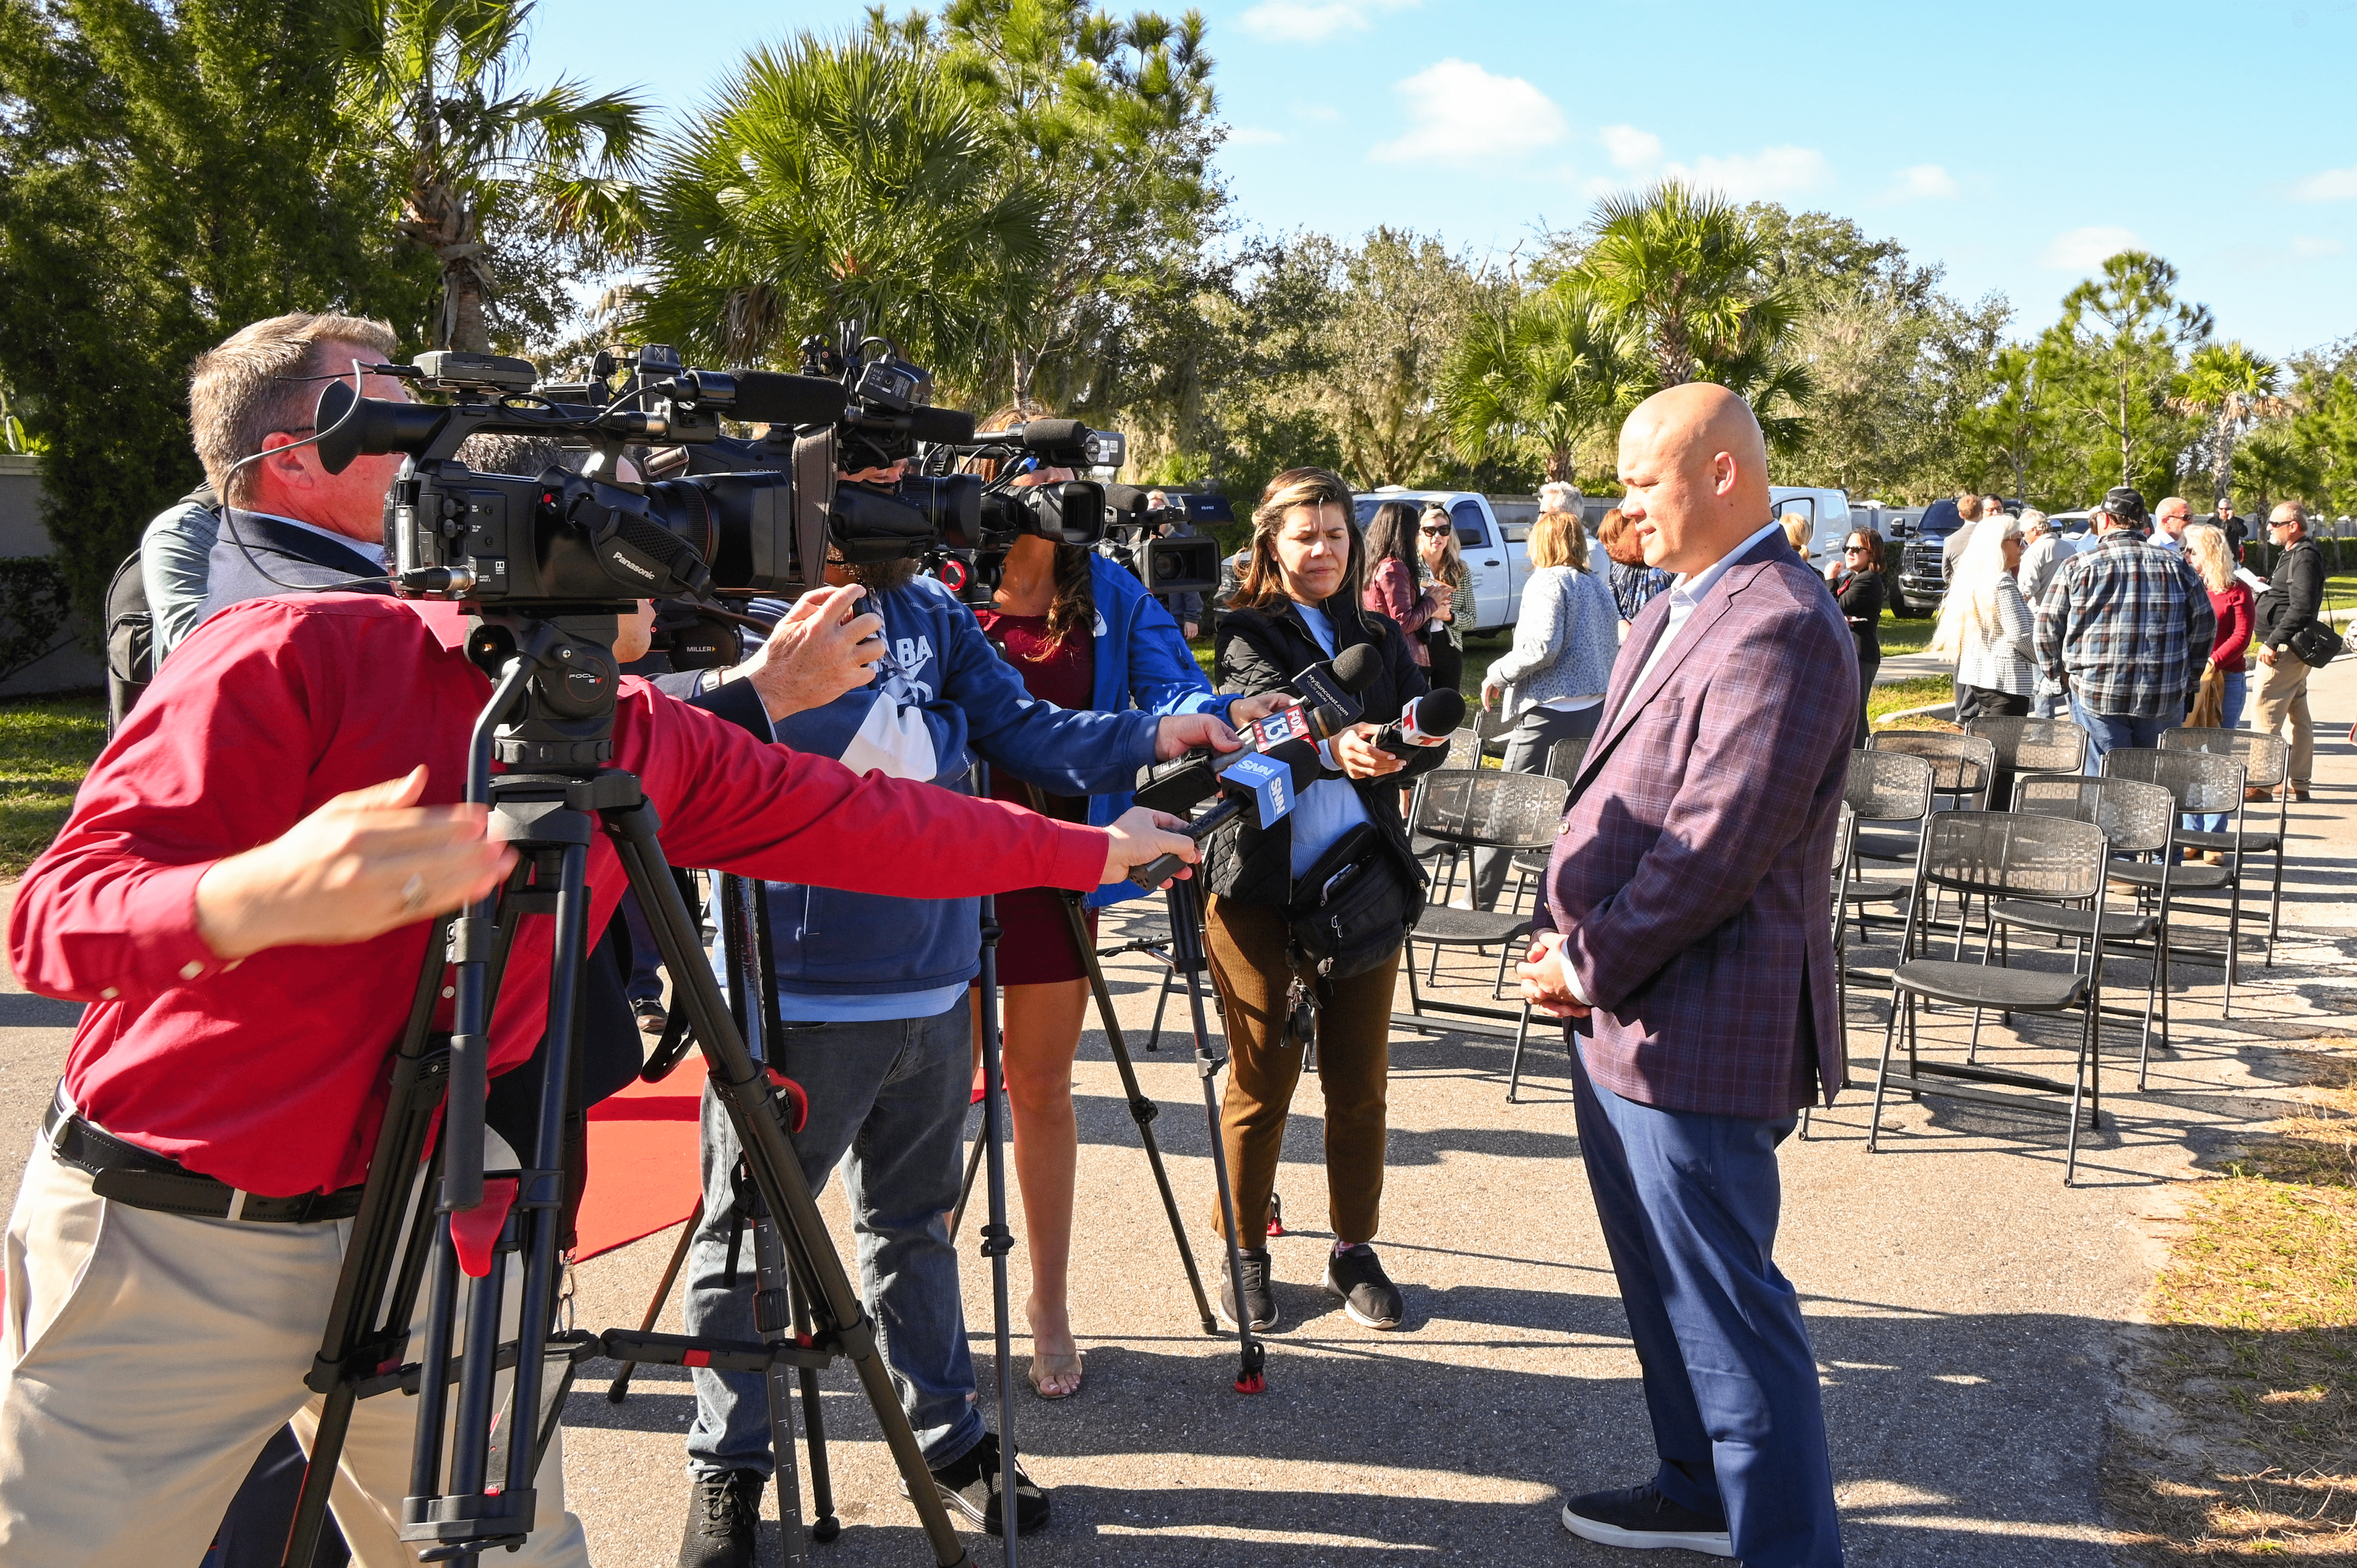 Chairs set up at the groundbreaking event with a TV crew conducting interviews